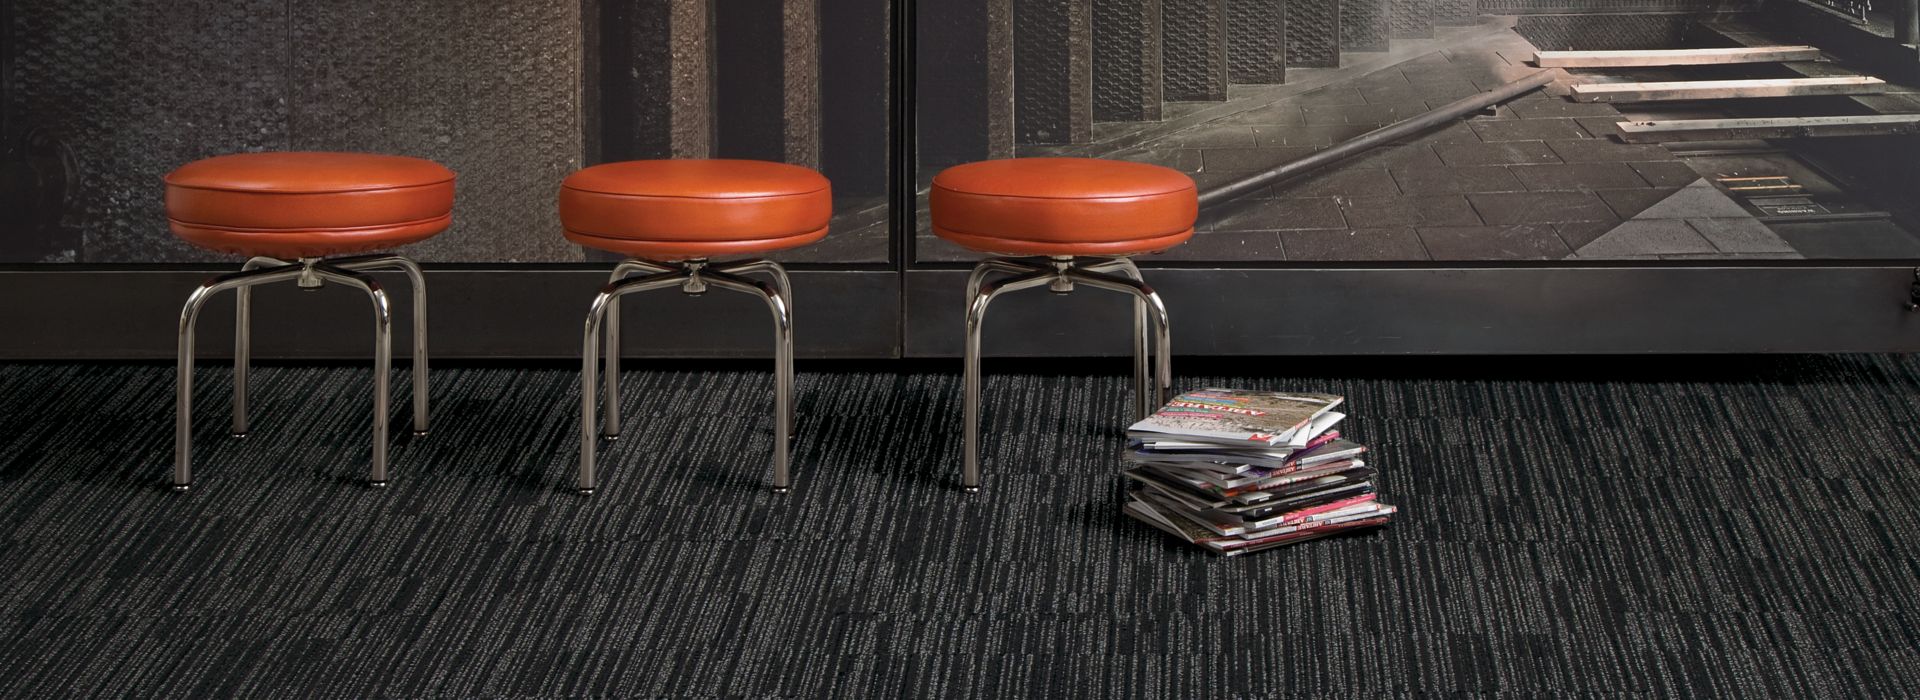 Interface CT102 carpet tile in open area with three red stools and stack of books numéro d’image 1